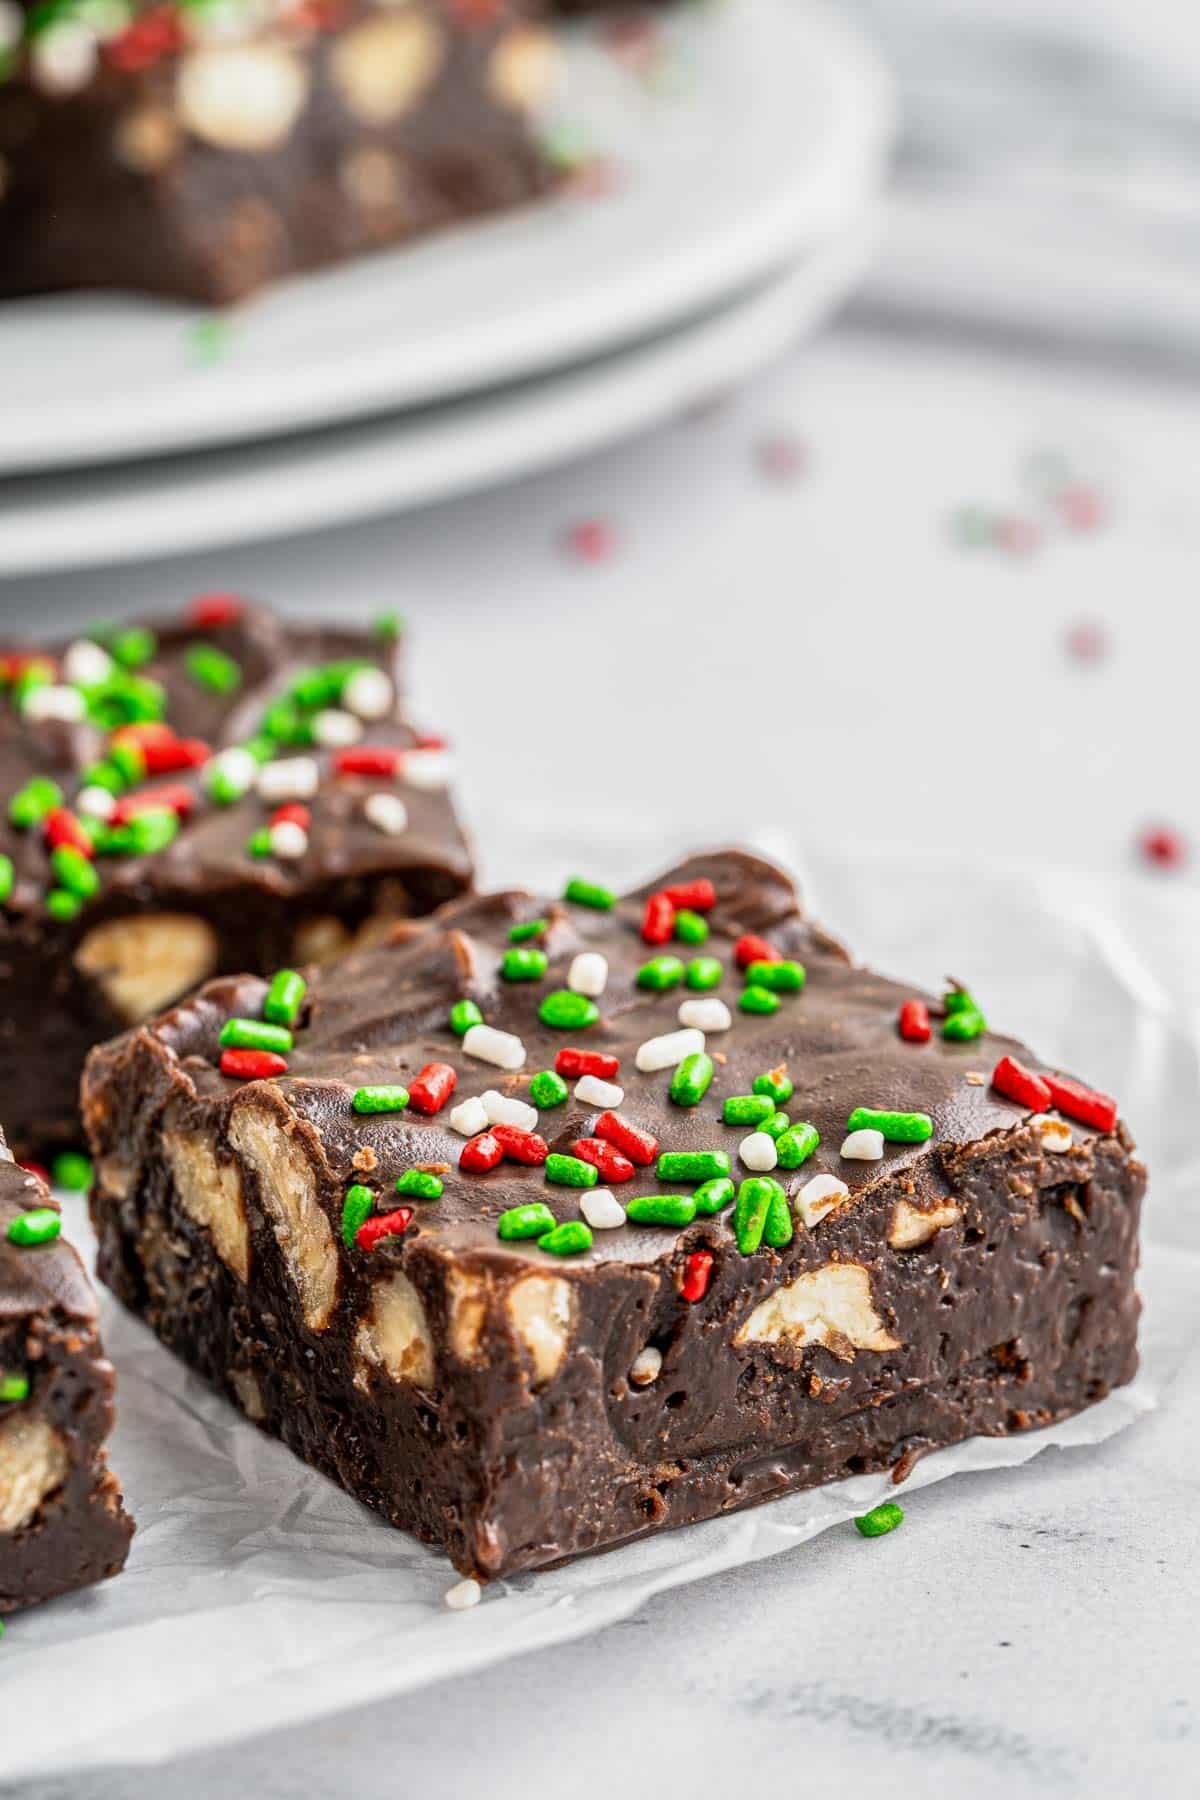 A piece of chocolate fudge with nuts inside and red and green sprinkles on top.